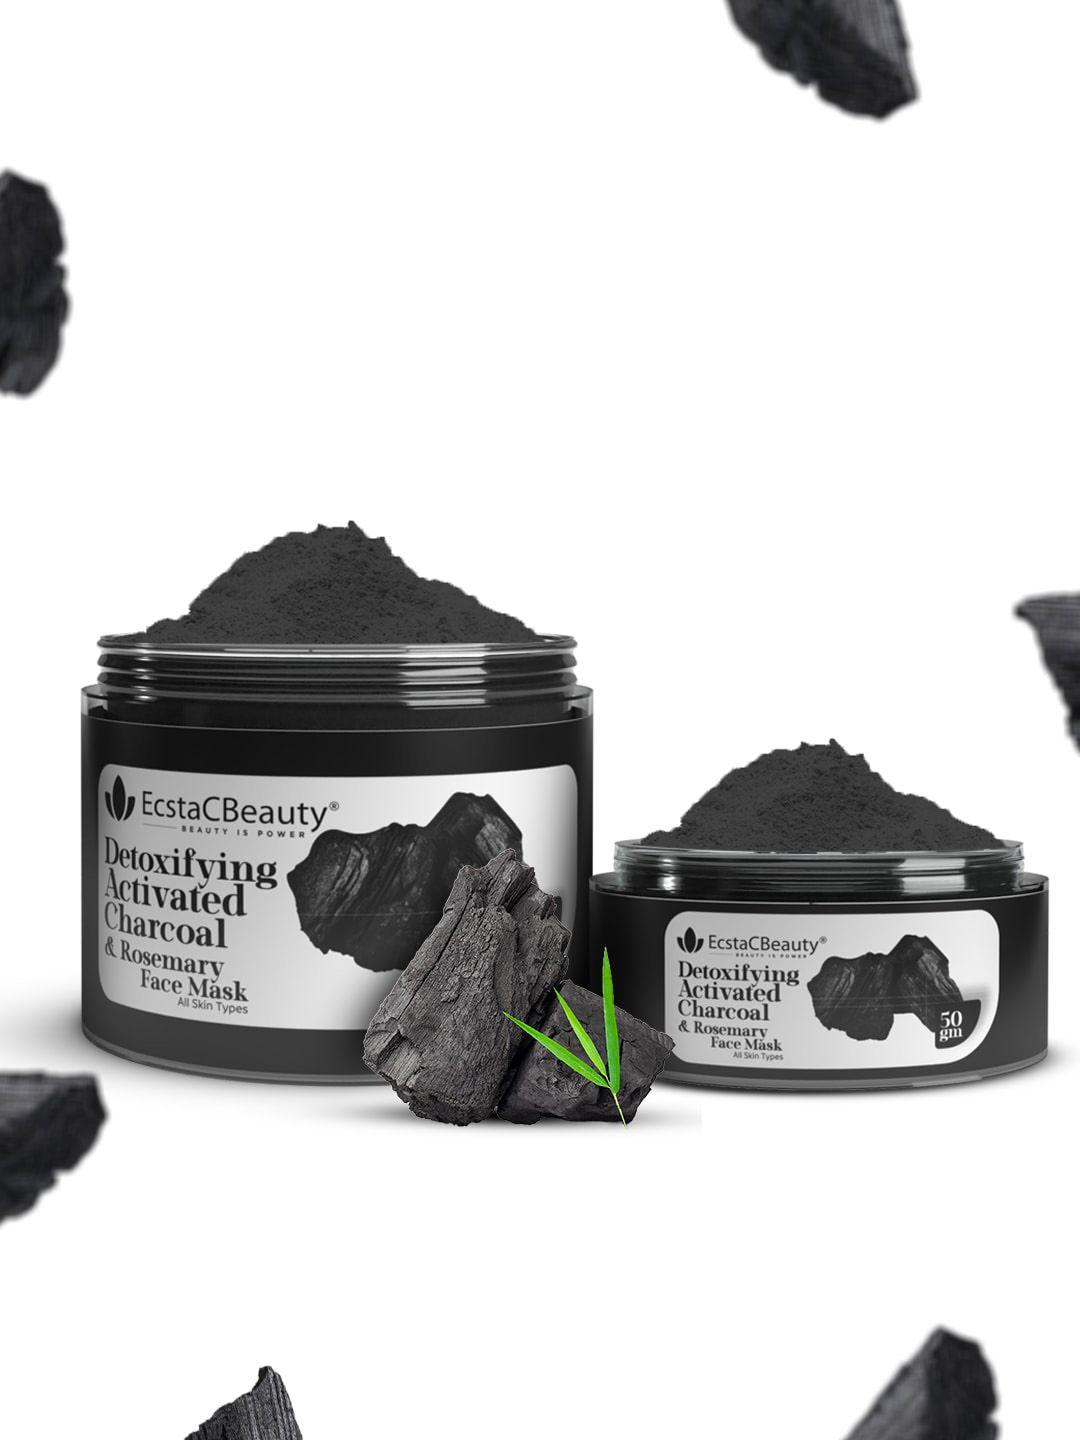 ecstacbeauty detoxifying activated charcoal & rosemary facial mask - 50g